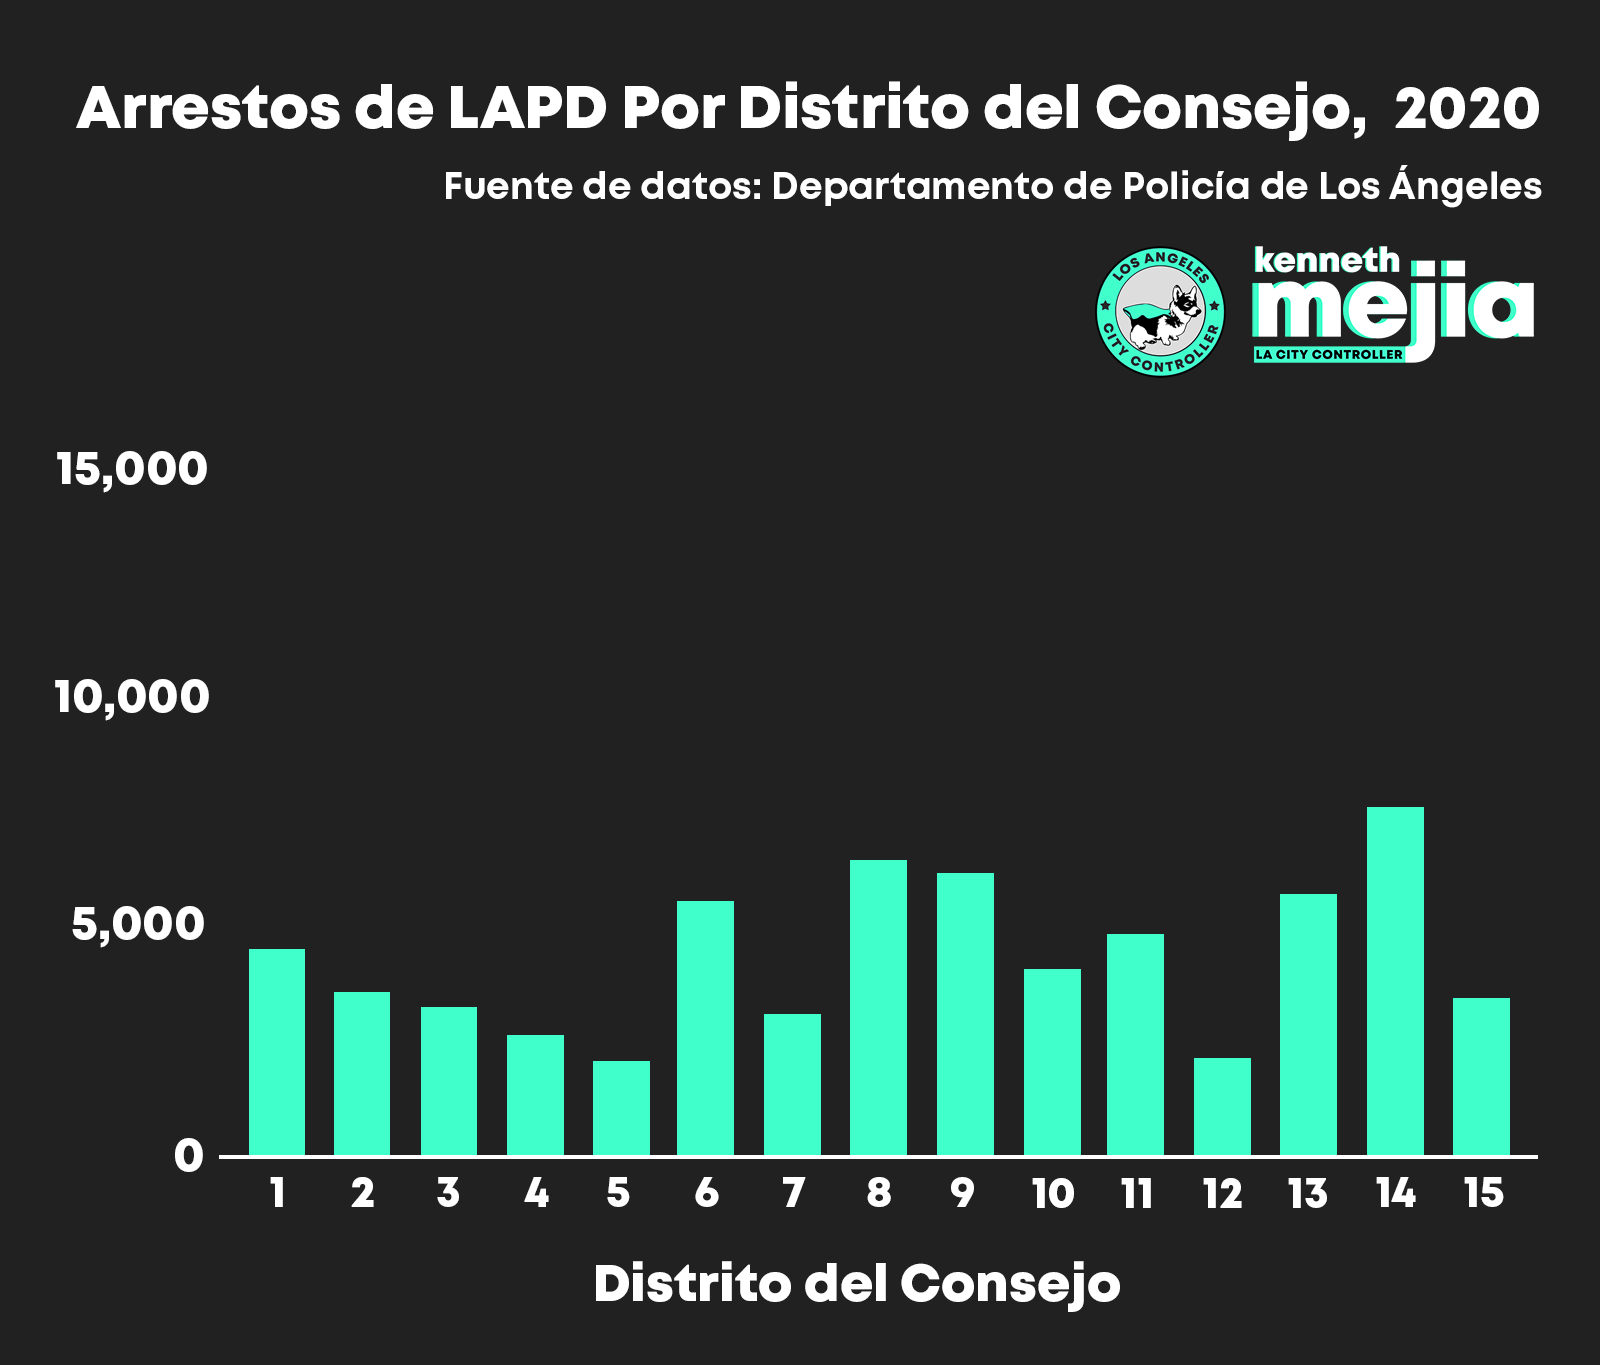 A bar chart of LAPD Arrests by Council District, 2020. There are fewer arrests overall compared to 2019. There are 15 Council Districts. Council District 14 has the highest number of arrests, at around 7,500 arrests, but is also fairly close in number of arrests to districts 8 and 9, which are around 6,000 arrests. CDs 1, 6, 10, 11, and 13 each have around 5,000 arrests. The rest of the Council Districts have much fewer than 5,000 arrests. CDs 5 and 12 have the fewest number of arrests, at under 2,500 arrests each. Source of data is LAPD.